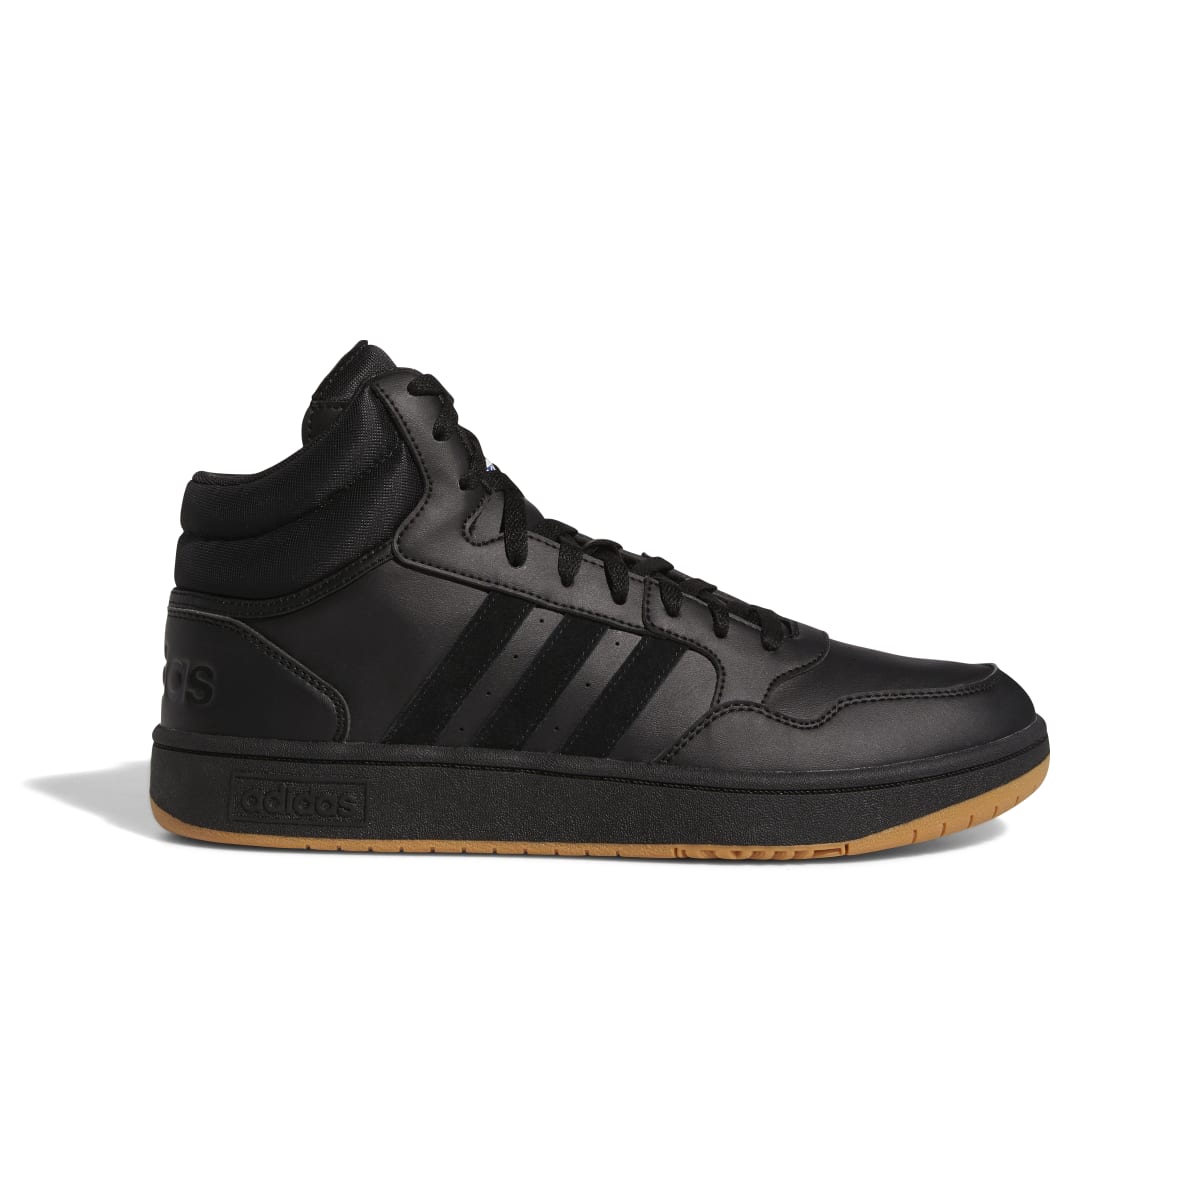 ADIDAS GY4745 HOOPS MID 3.0 MN'S (Medium) Black/Black/White Leather Basketball Shoes